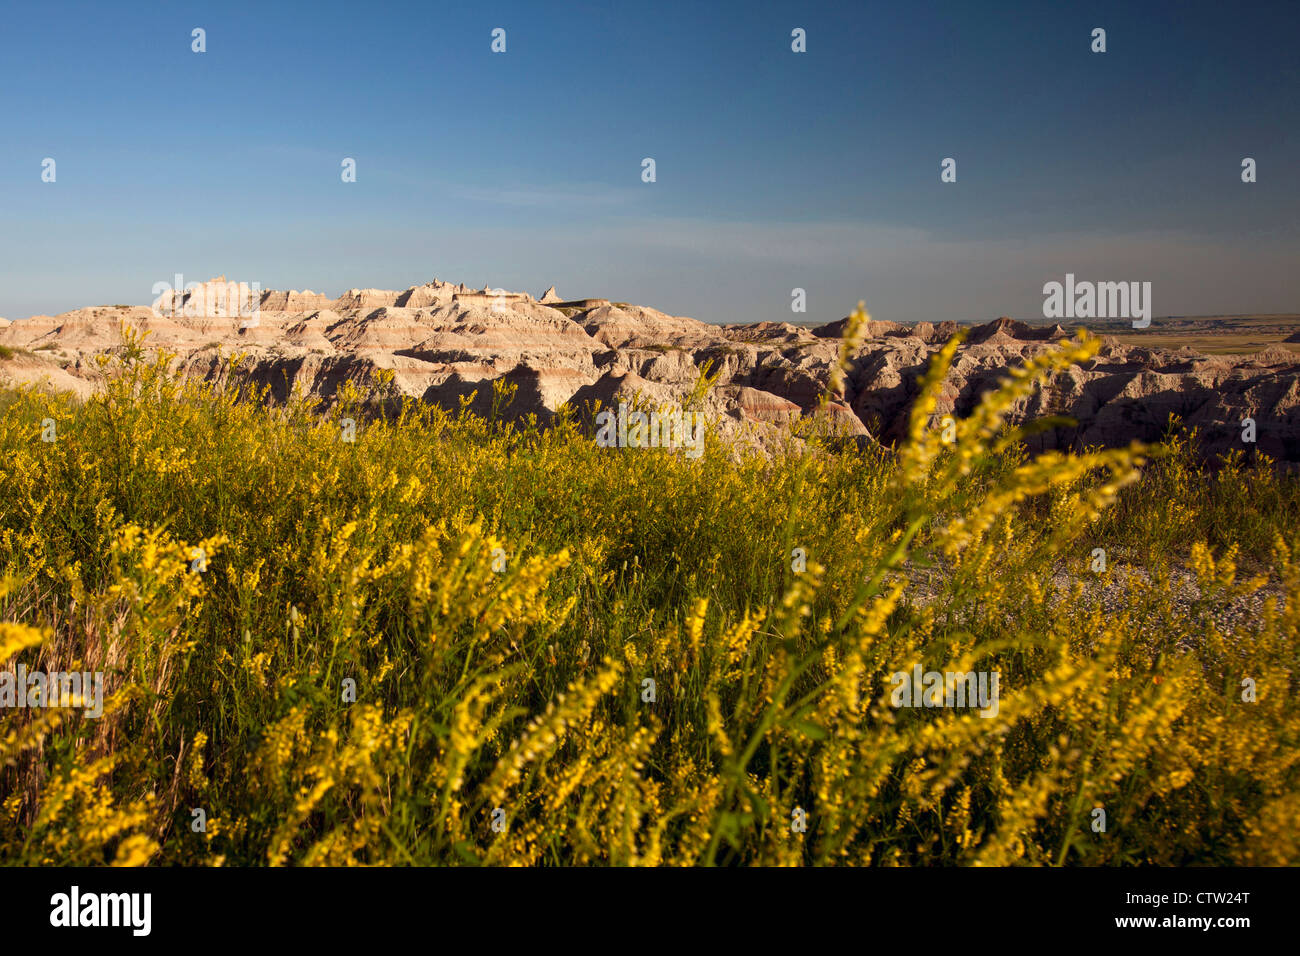 General view of wild flowers in front of large rock formations, Badlands National Park, South Dakota, United States of America Stock Photo